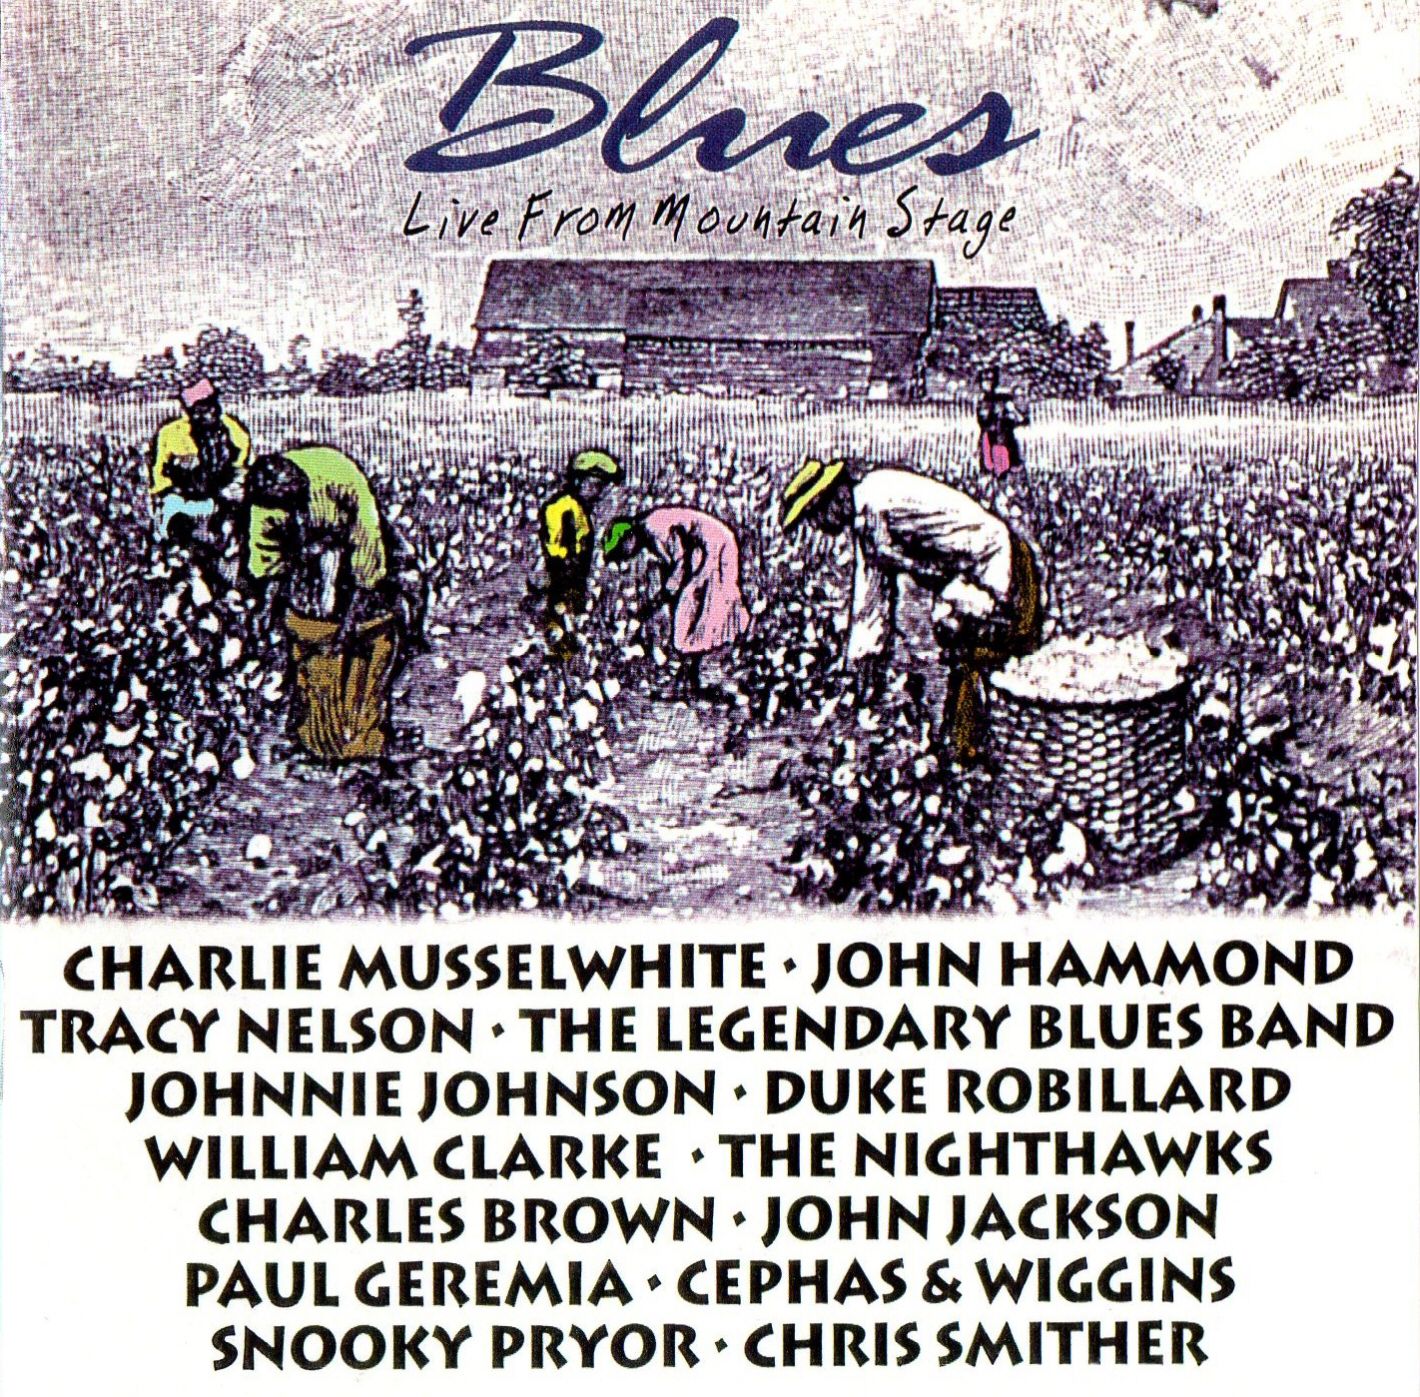 VA - Blues Live From Mountain Stage (1995)